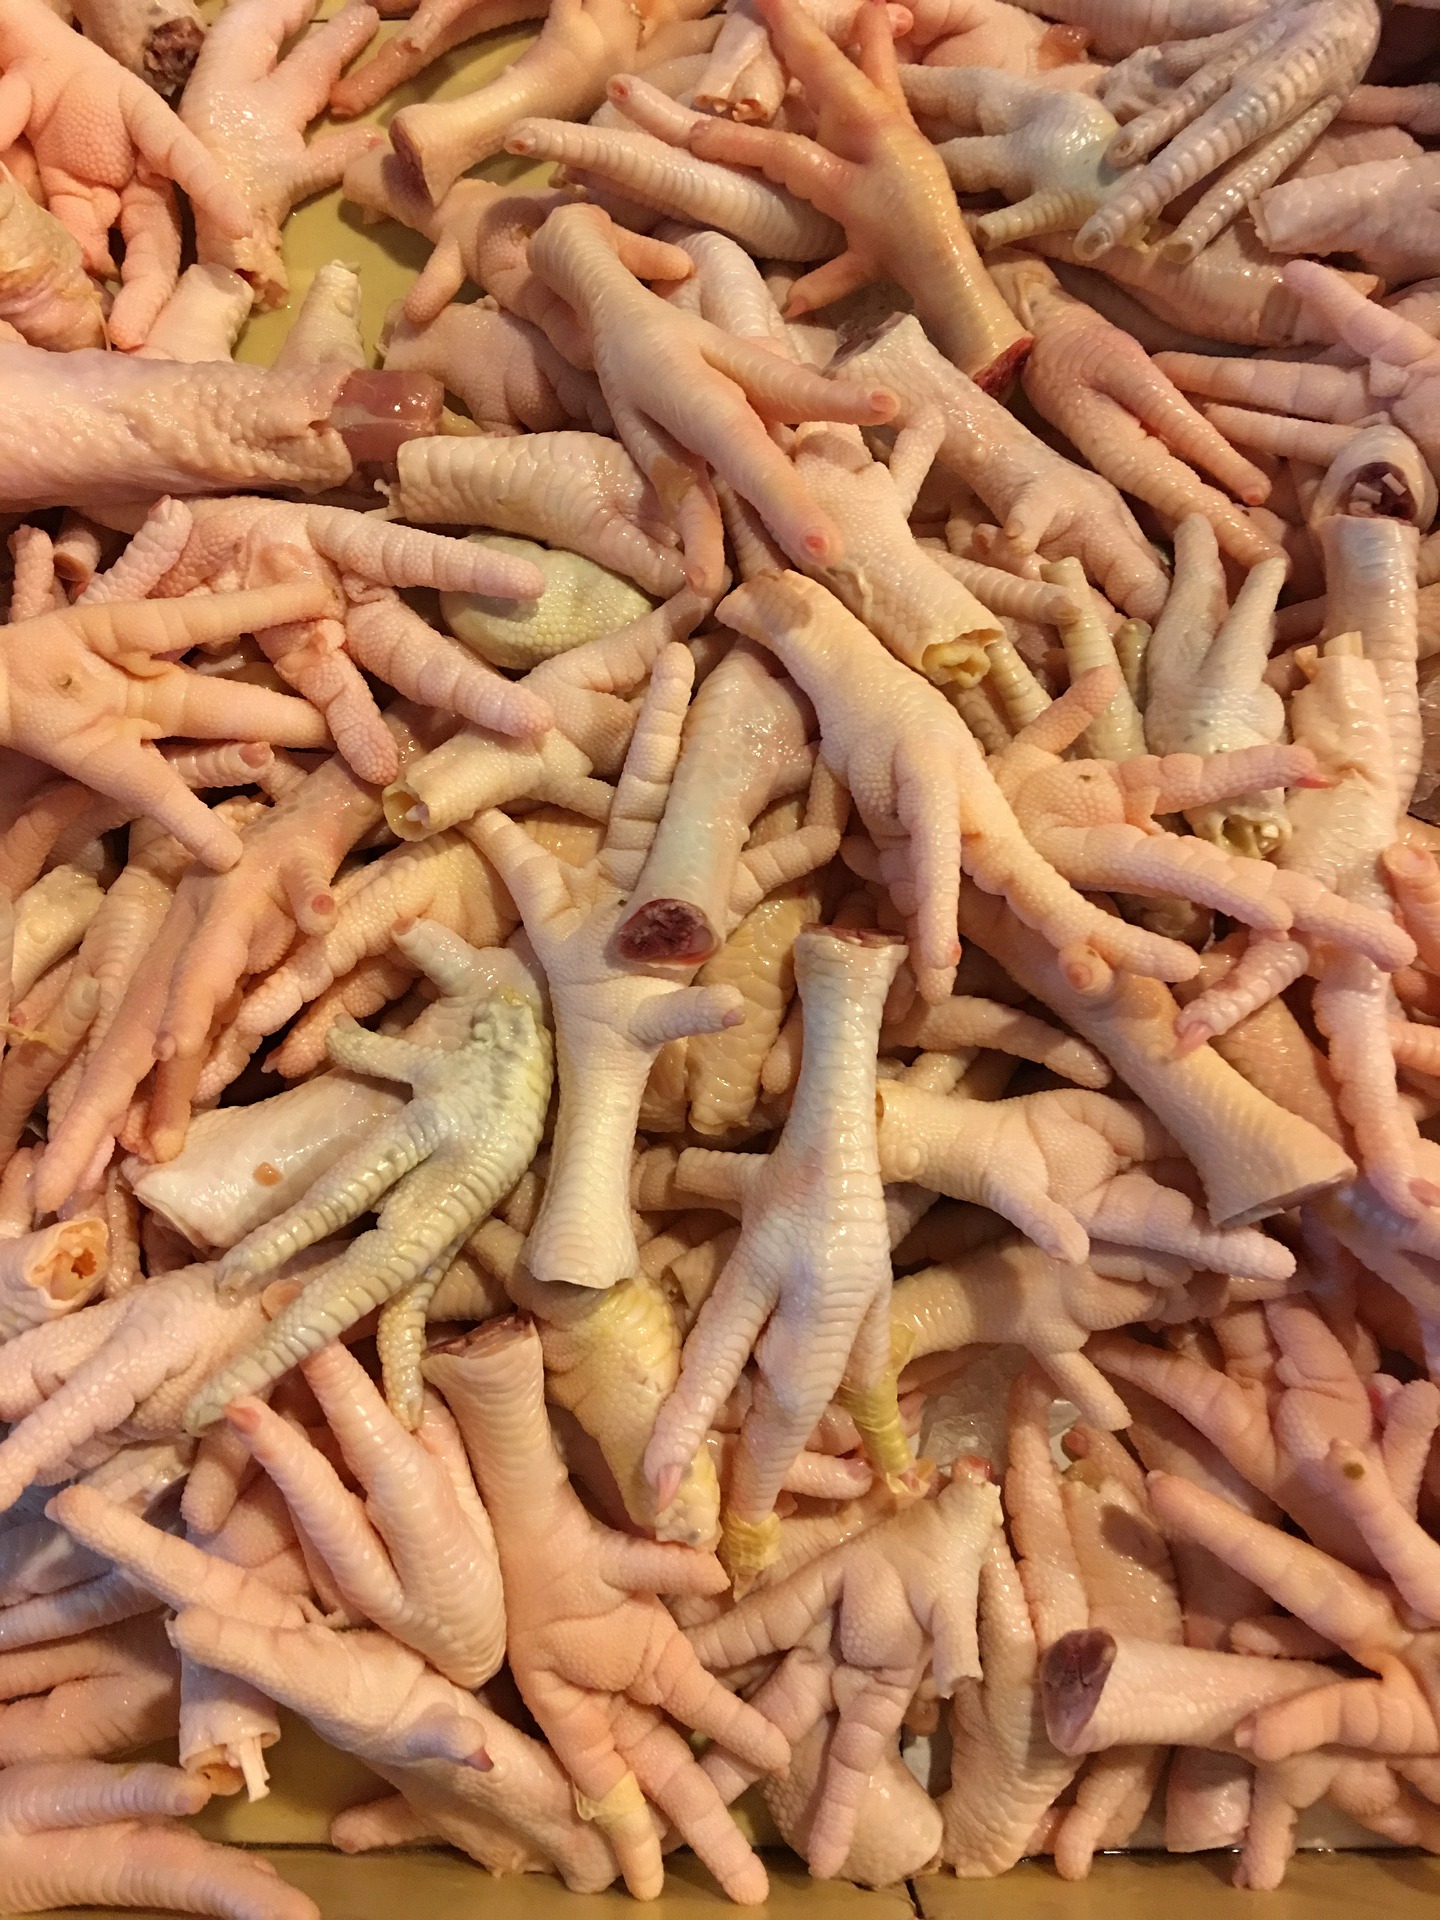 Chicken Feet Craze: China’s Growing Demand and Global Trade Dynamics